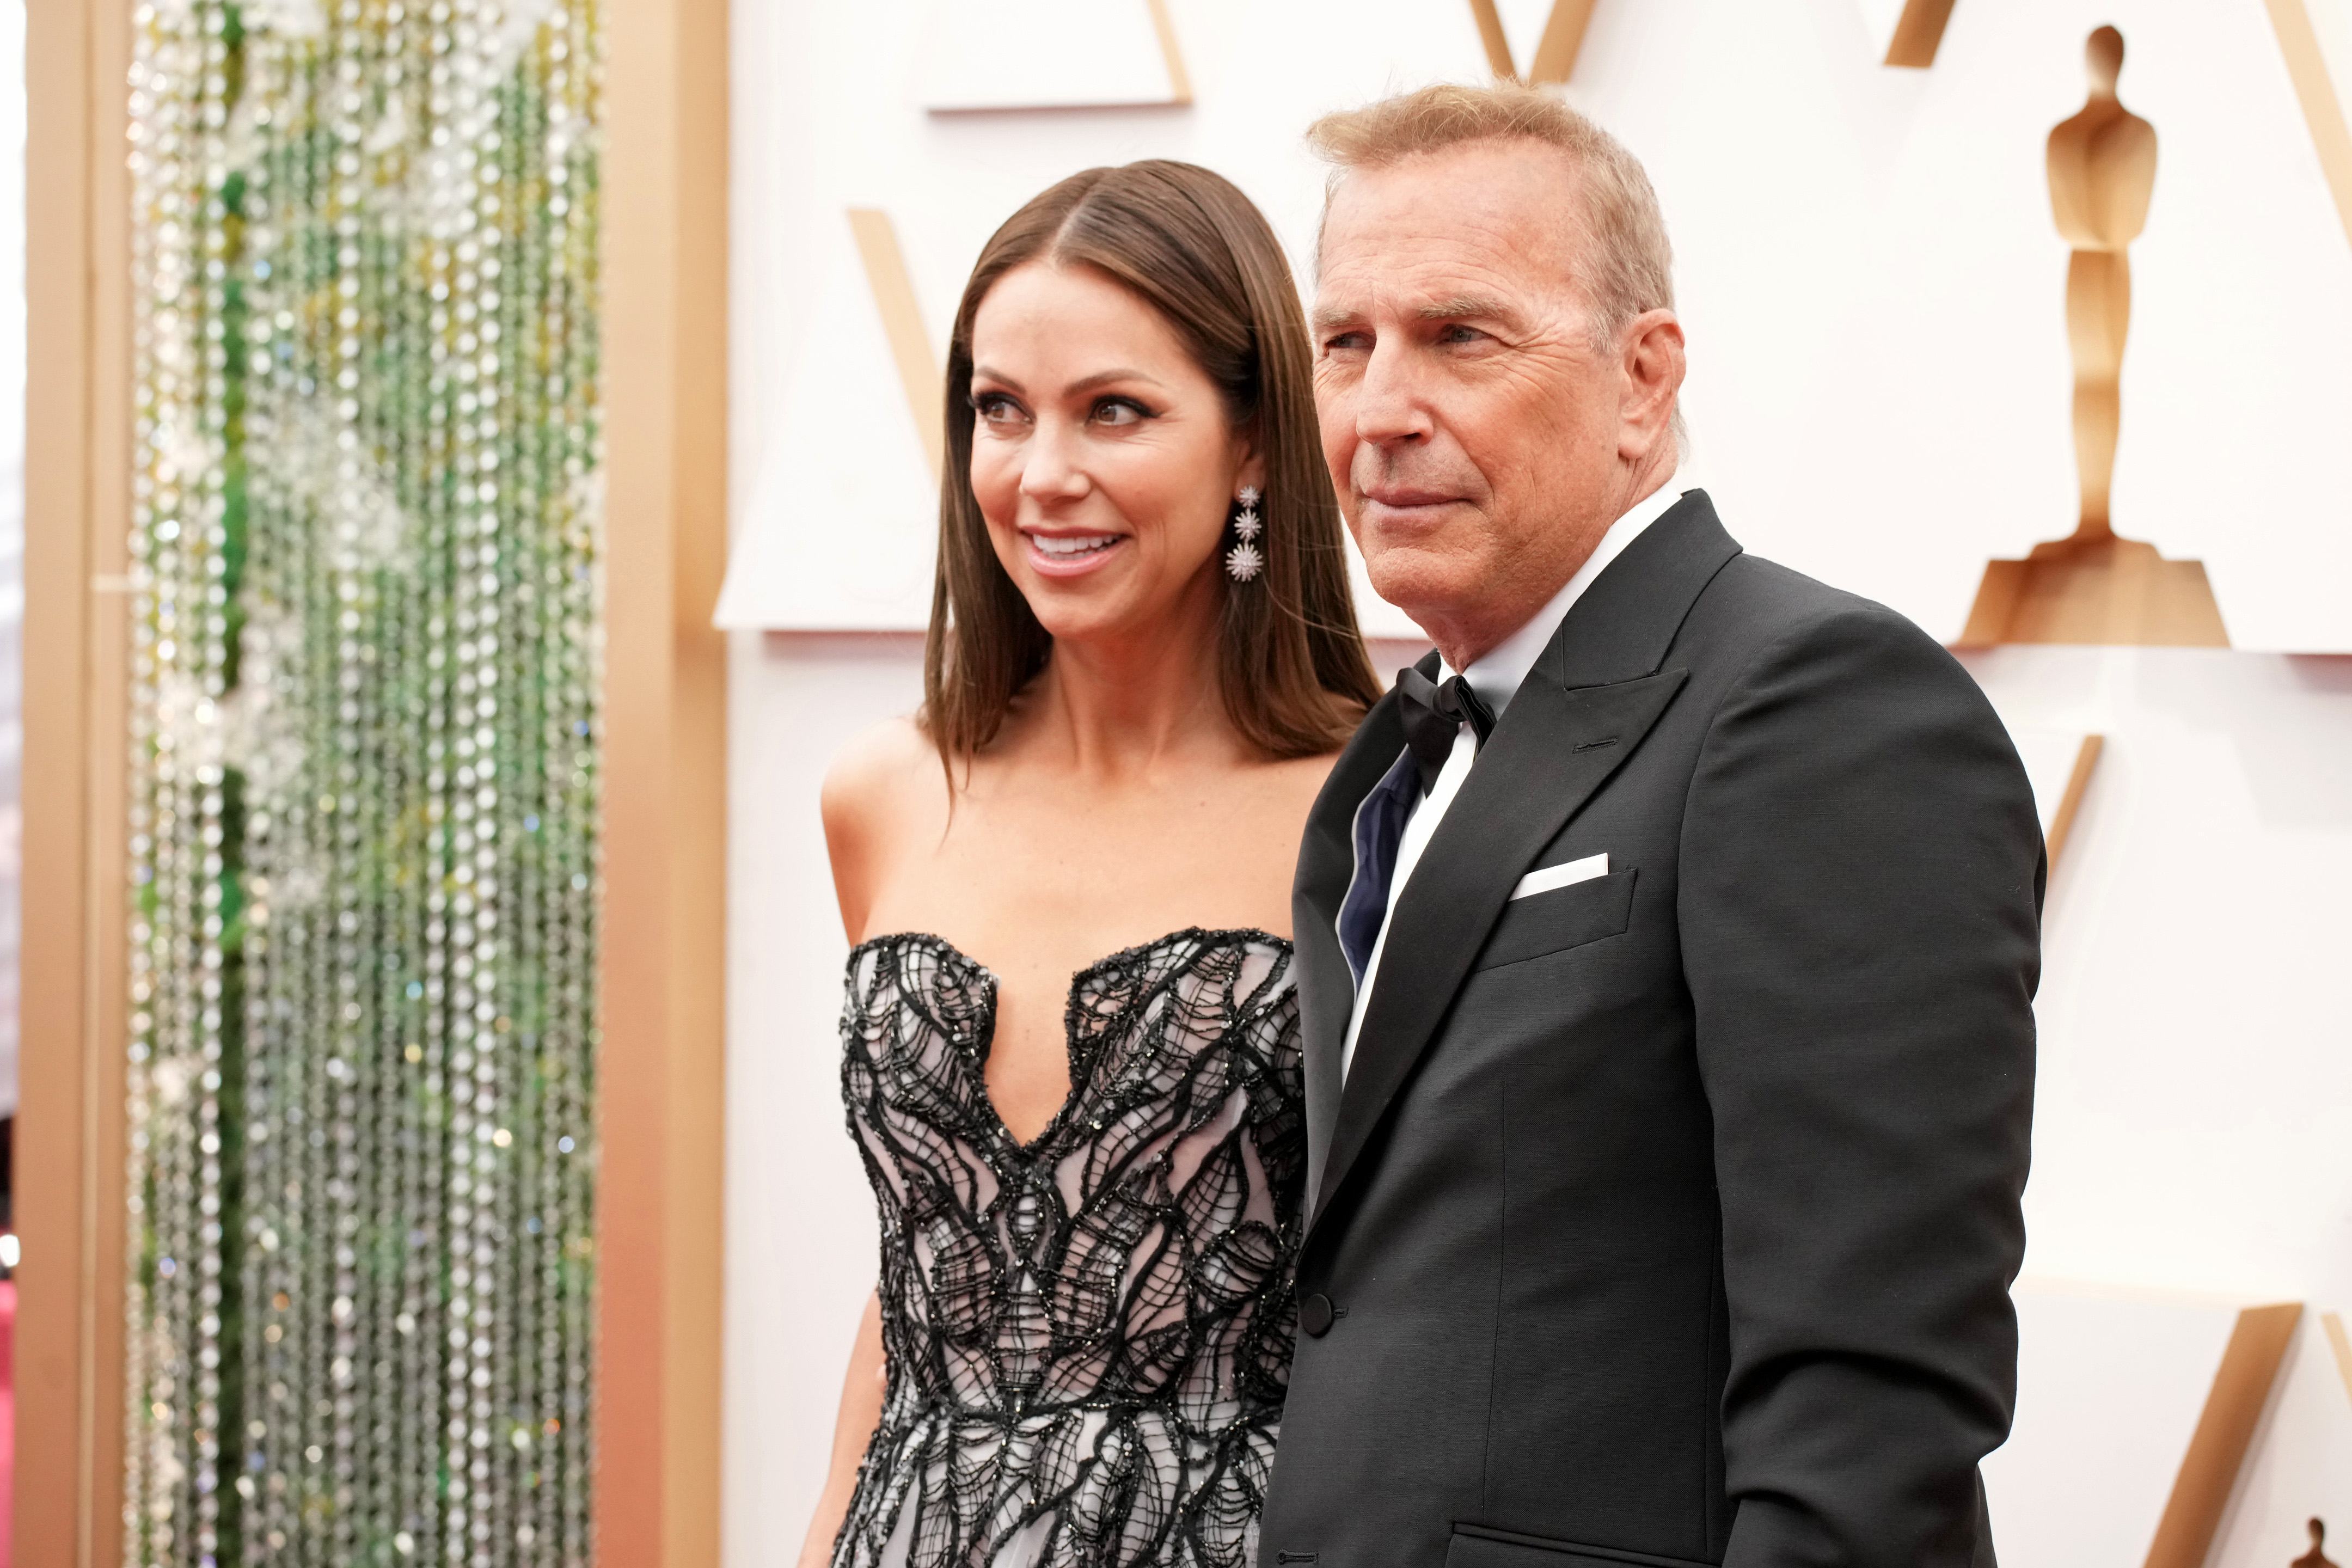 Christine Baumgartner and Kevin Costner at the 94th Annual Academy Awards in Hollywood, California on March 27, 2022 | Source: Getty Images